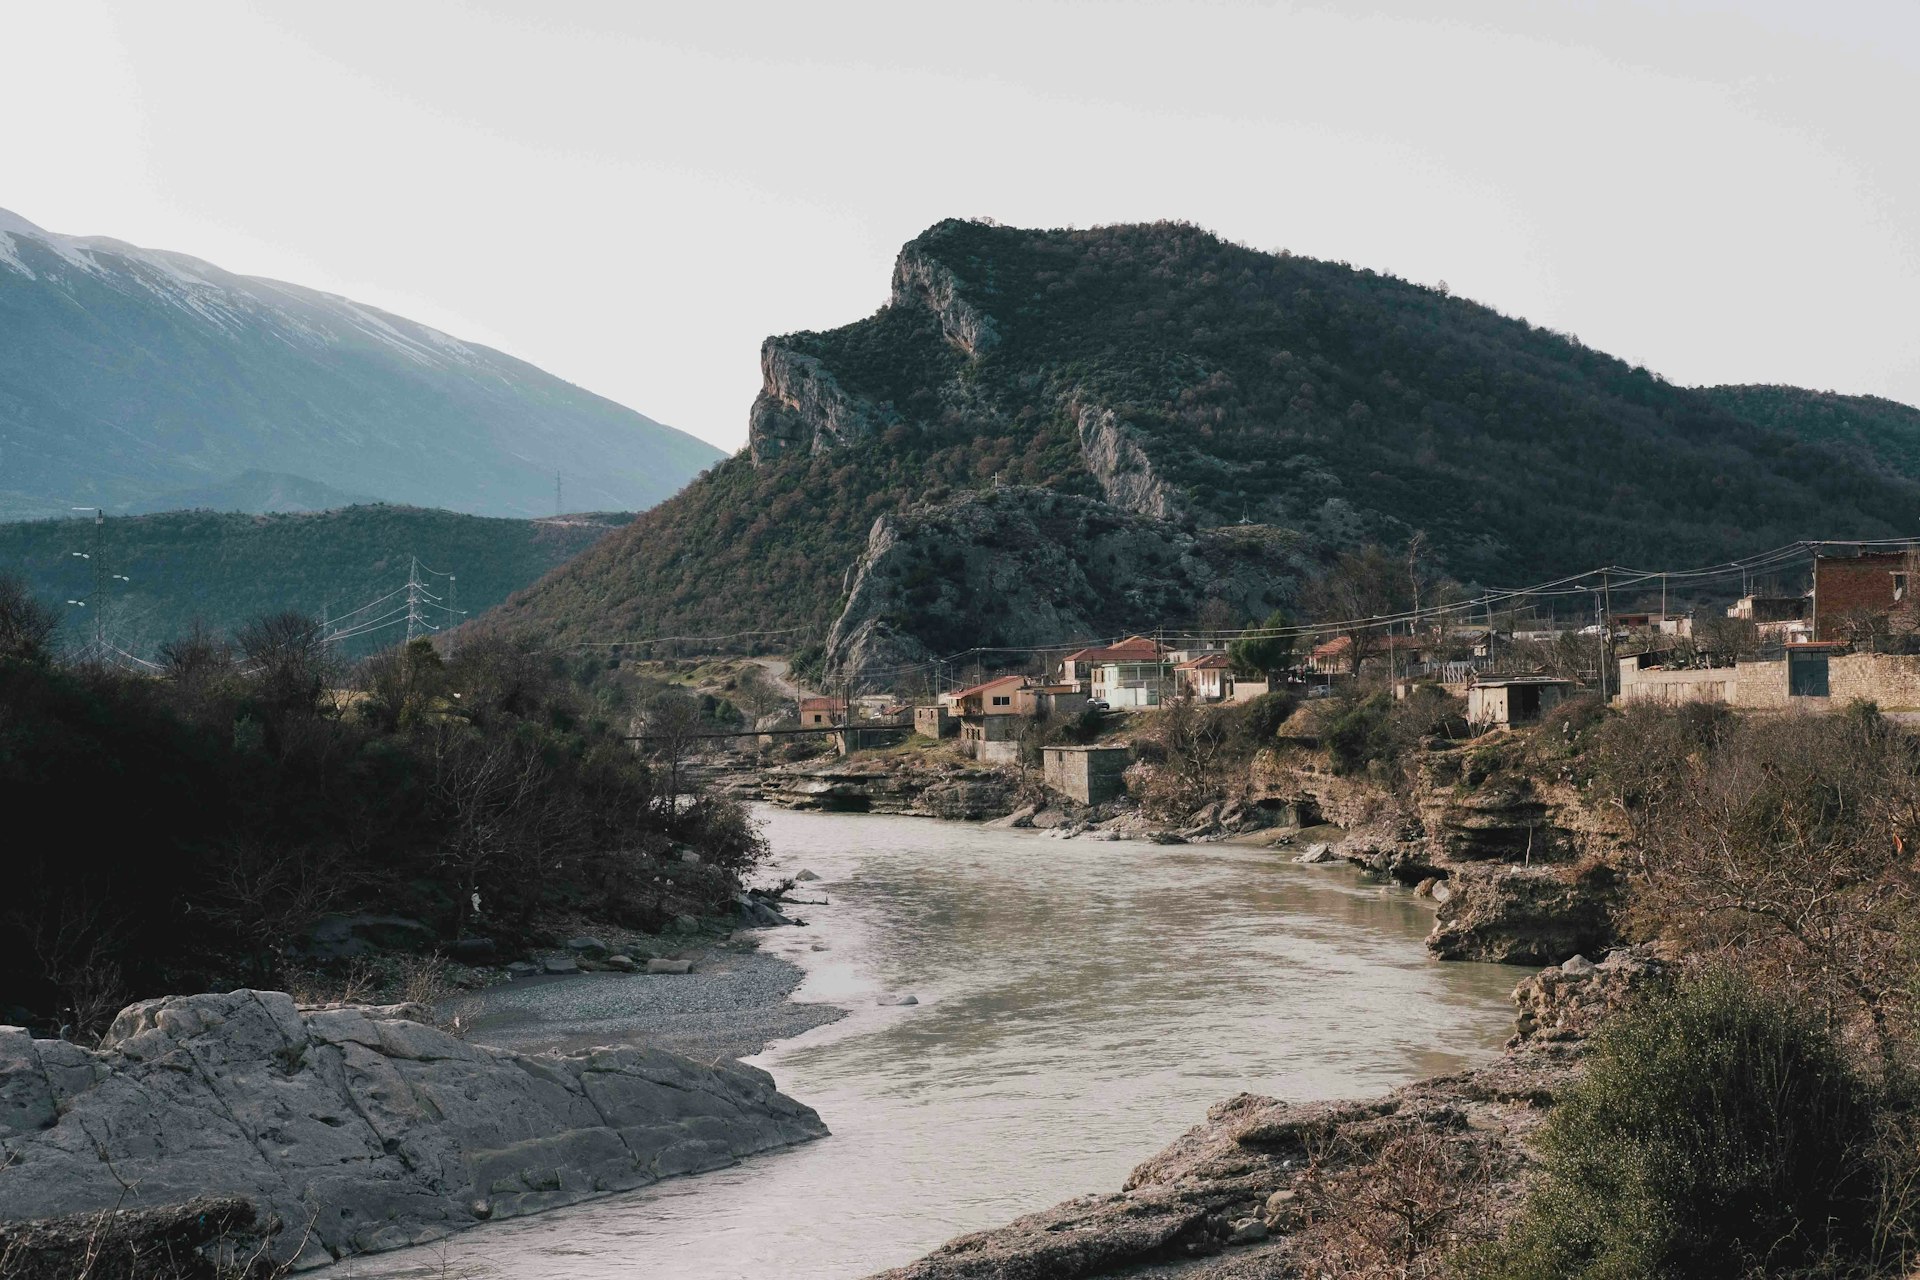 The Travel Diary: Uncertain futures along Europe's last undammed river